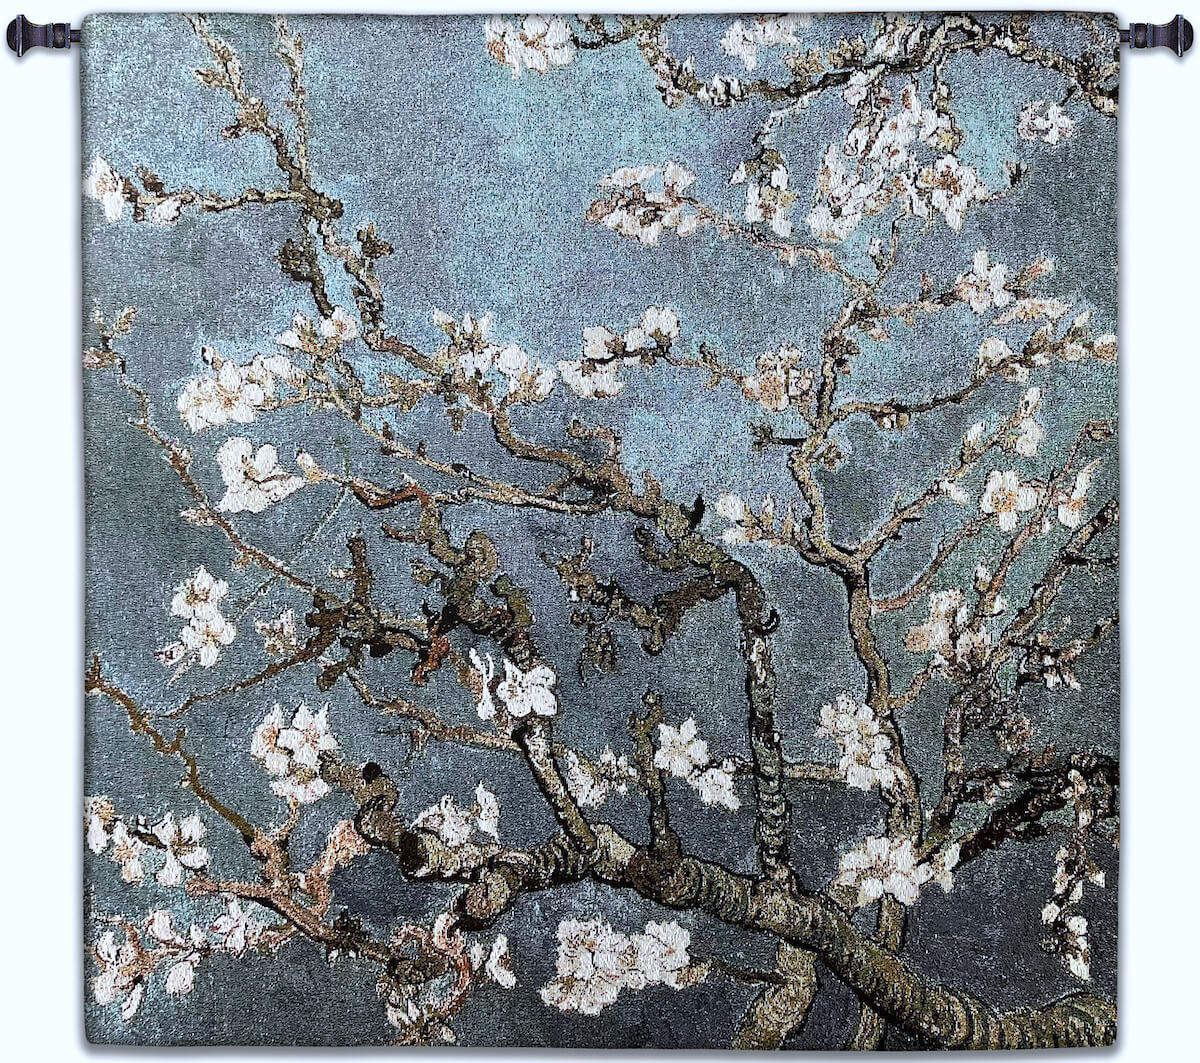 Almond Blossom Blue Square Wall Tapestry C-4572M, 4572-Wh, 4572C, 4572Cm, 4572Wh, 4590-Wh, 4590C, 4590Wh, 52H, 52W, Abstract, Almond, Art, S, Blossom, Blue, Botanical, Carolina, USAwoven, Cotton, Floral, Flower, Flowers, Gogh, Gray, Grey, Hanging, Oriental, Pedals, Purple, Seller, Square, Tapestries, Tapestry, Top50, Tree, Van, Wall, White, Woven, Woven, Bestseller, tapestries, tapestrys, hangings, and, the, exclusive